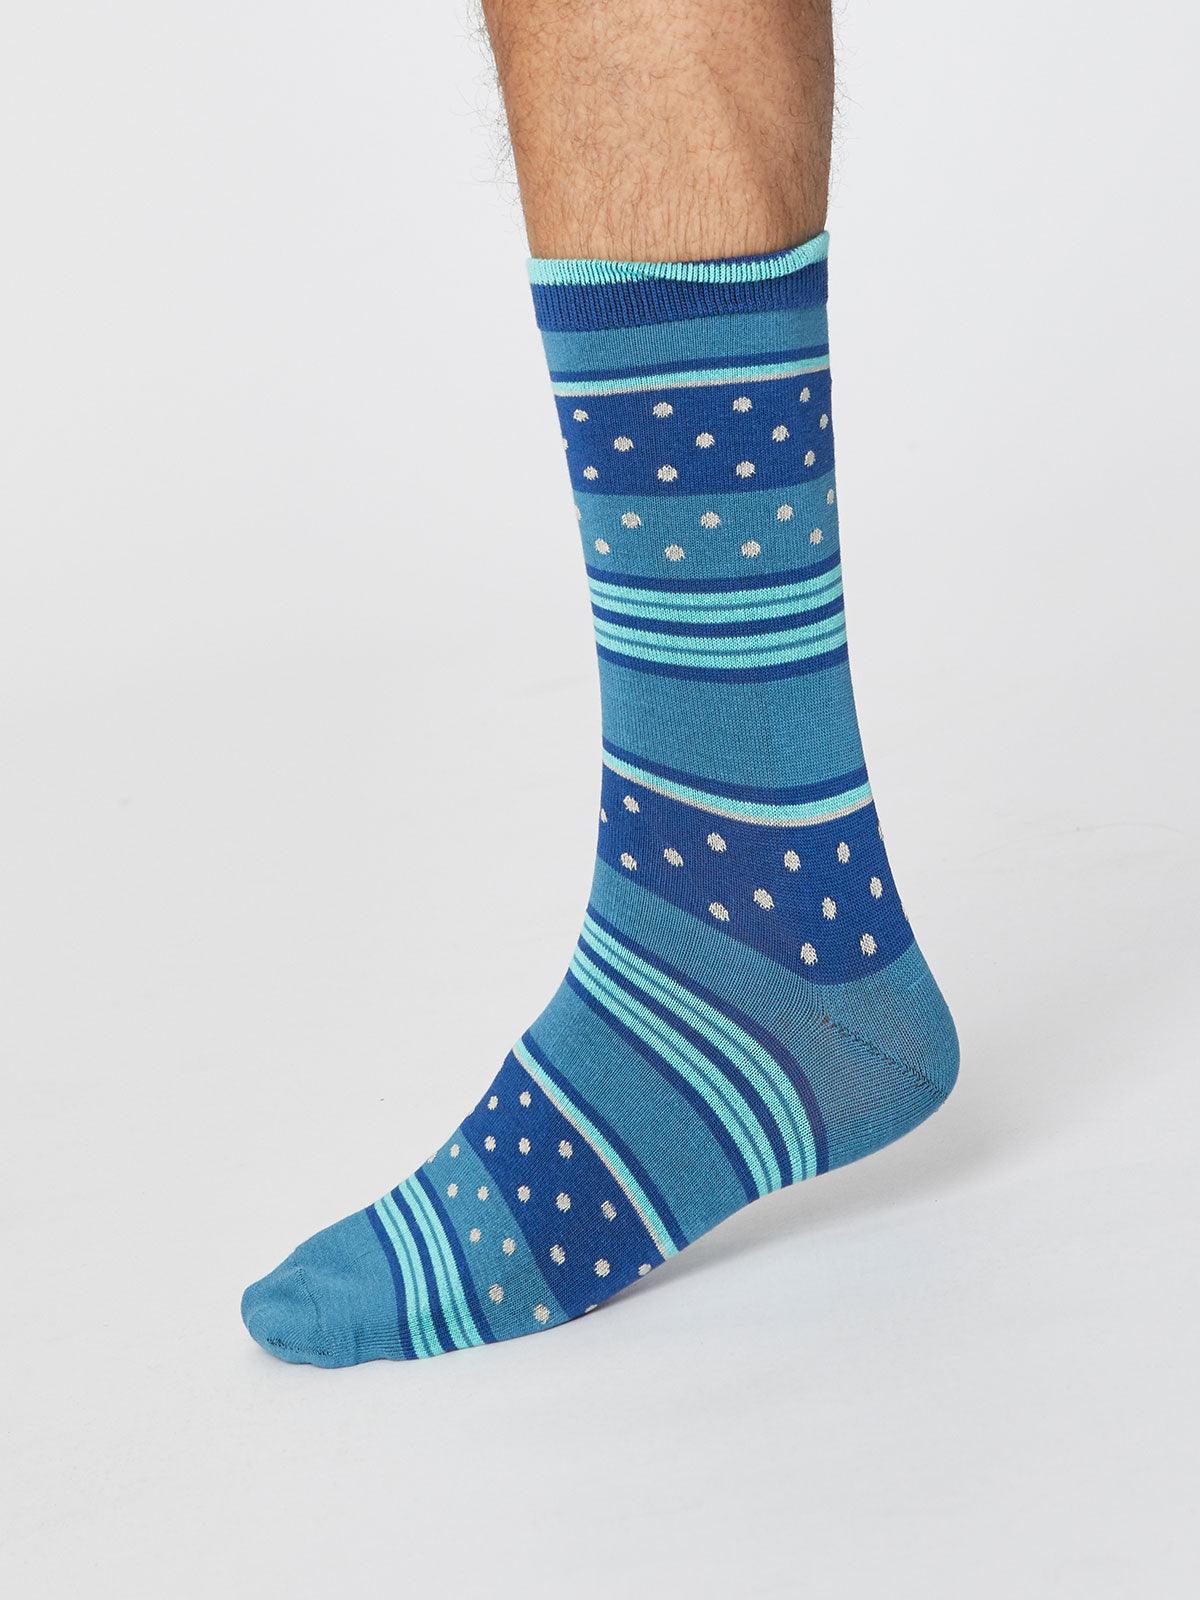 Spot And Stripe Bamboo Socks - Dusty Blue - Thought Clothing UK